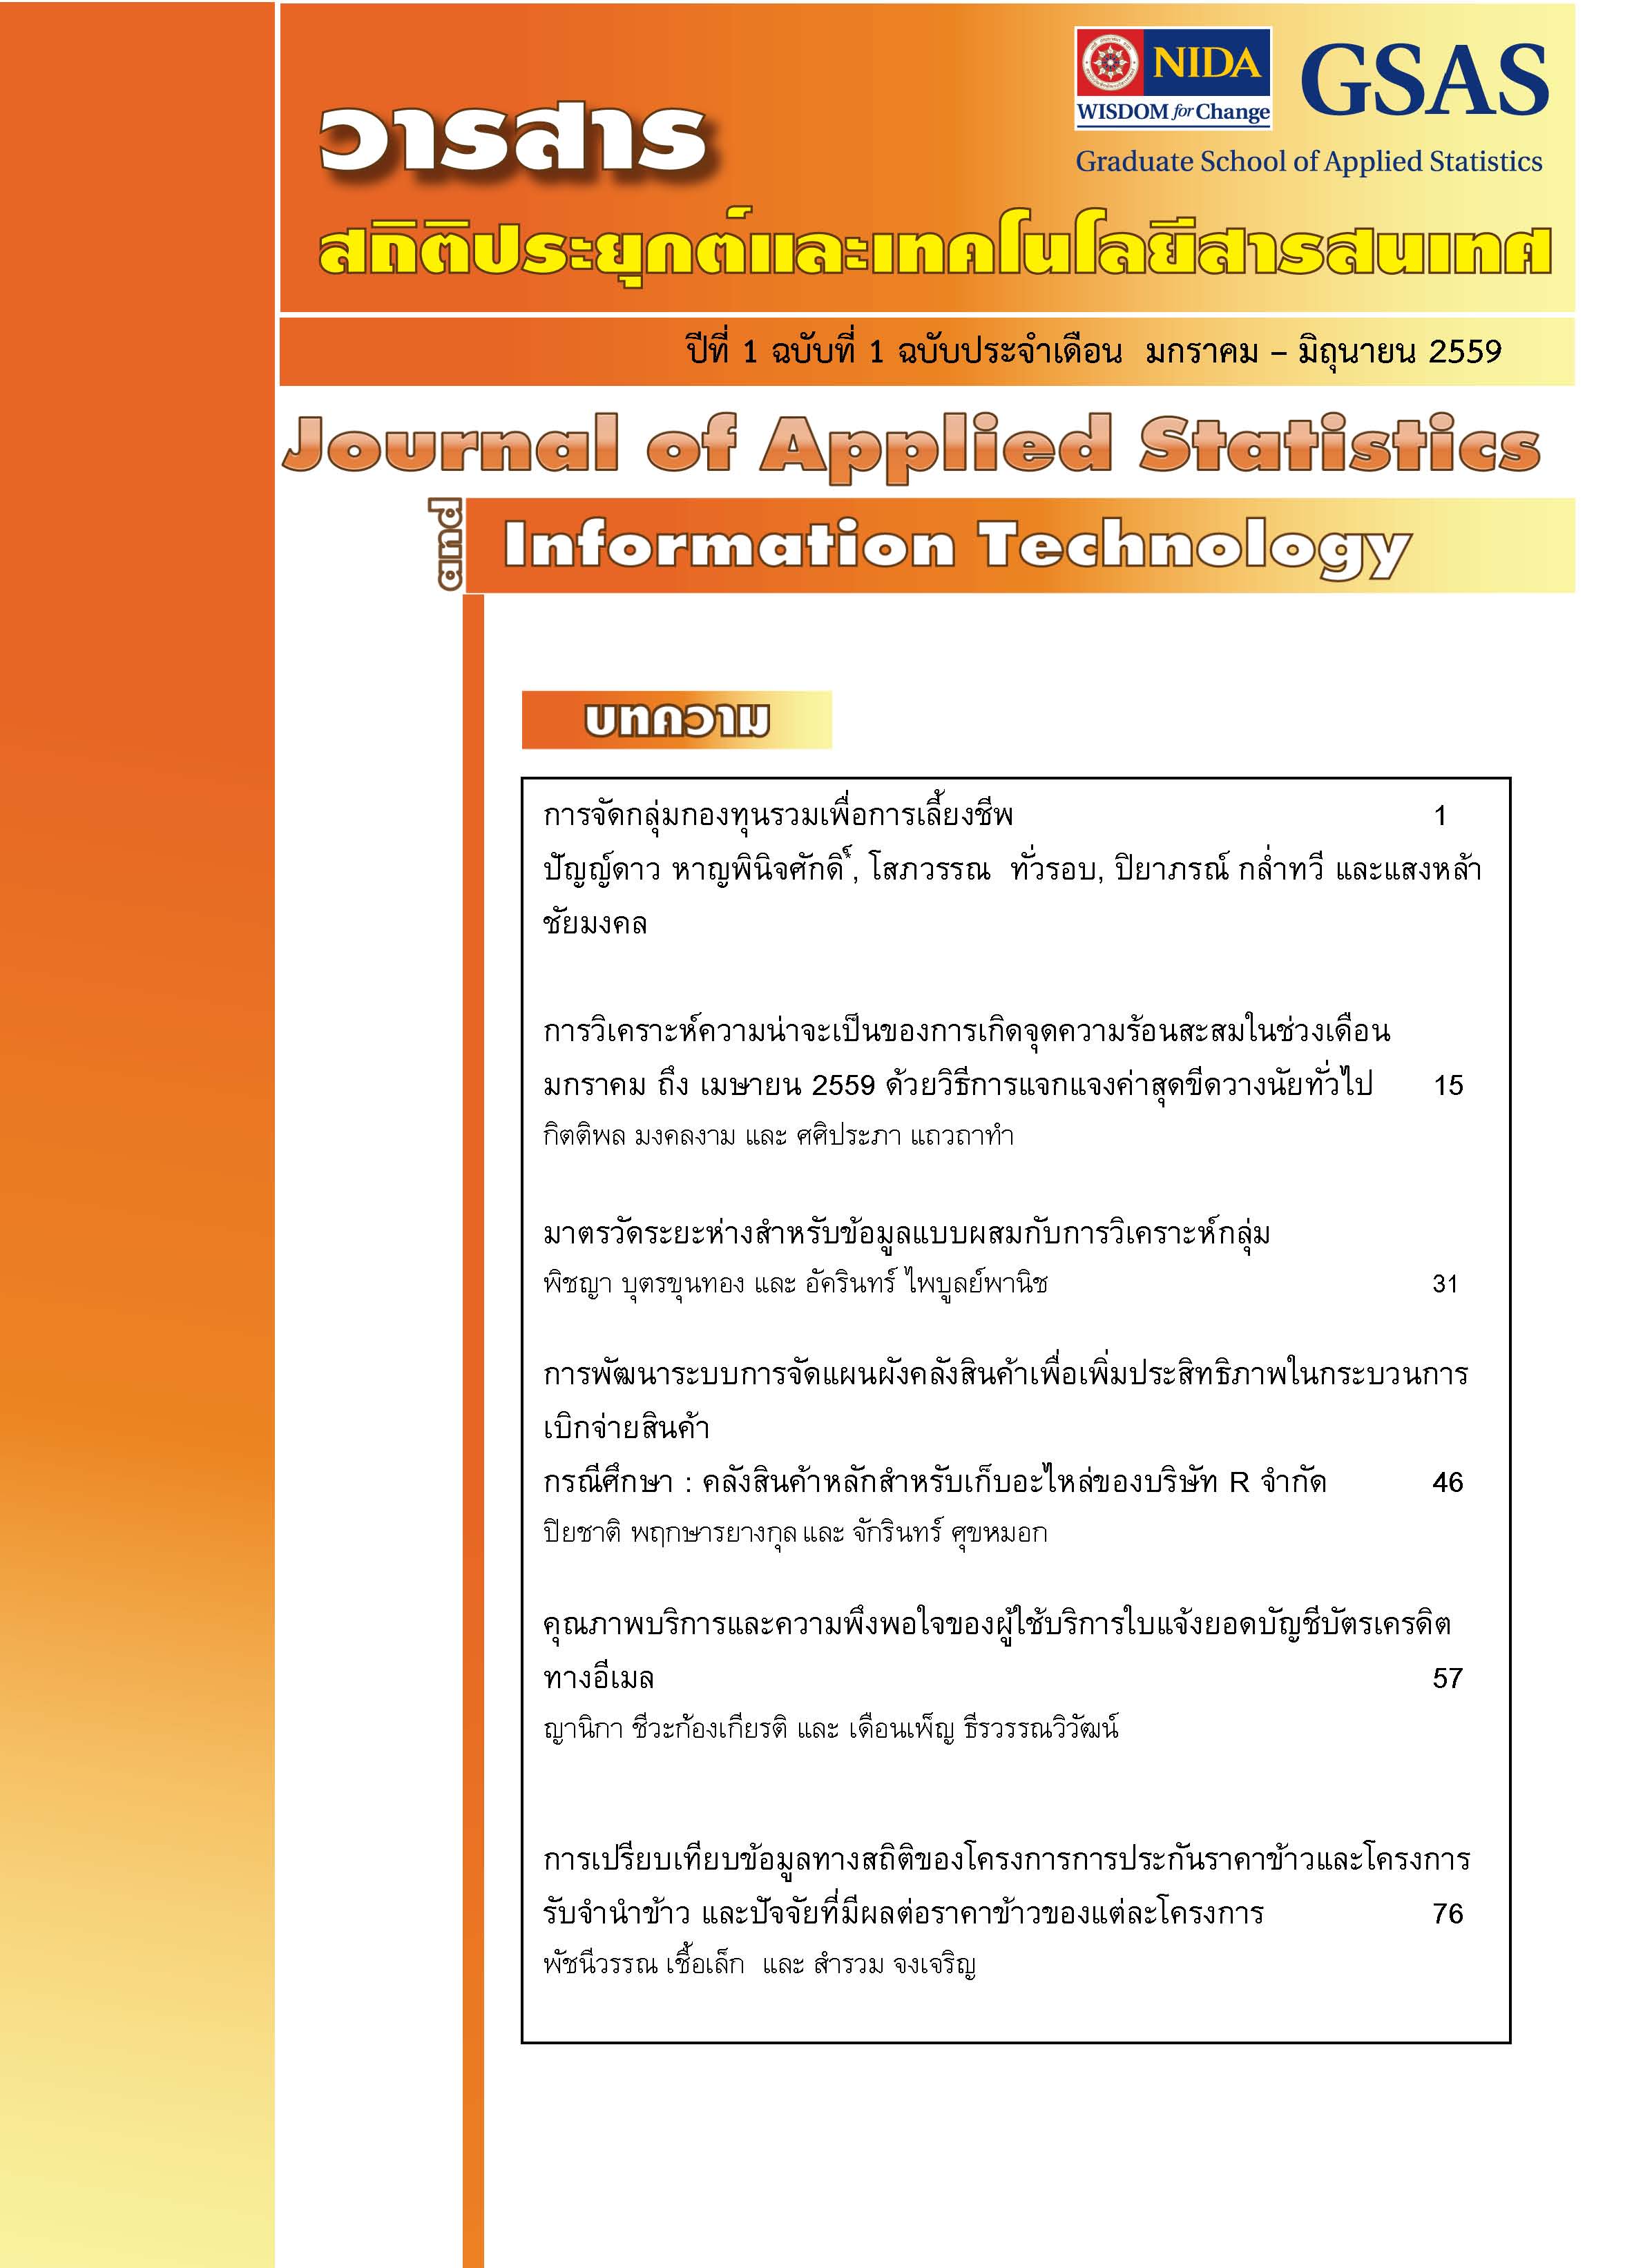 					View Vol. 1 No. 1 (2016): Journal of Applied Statistics and Information Technology Vol1 No1 (January - June 2016)
				